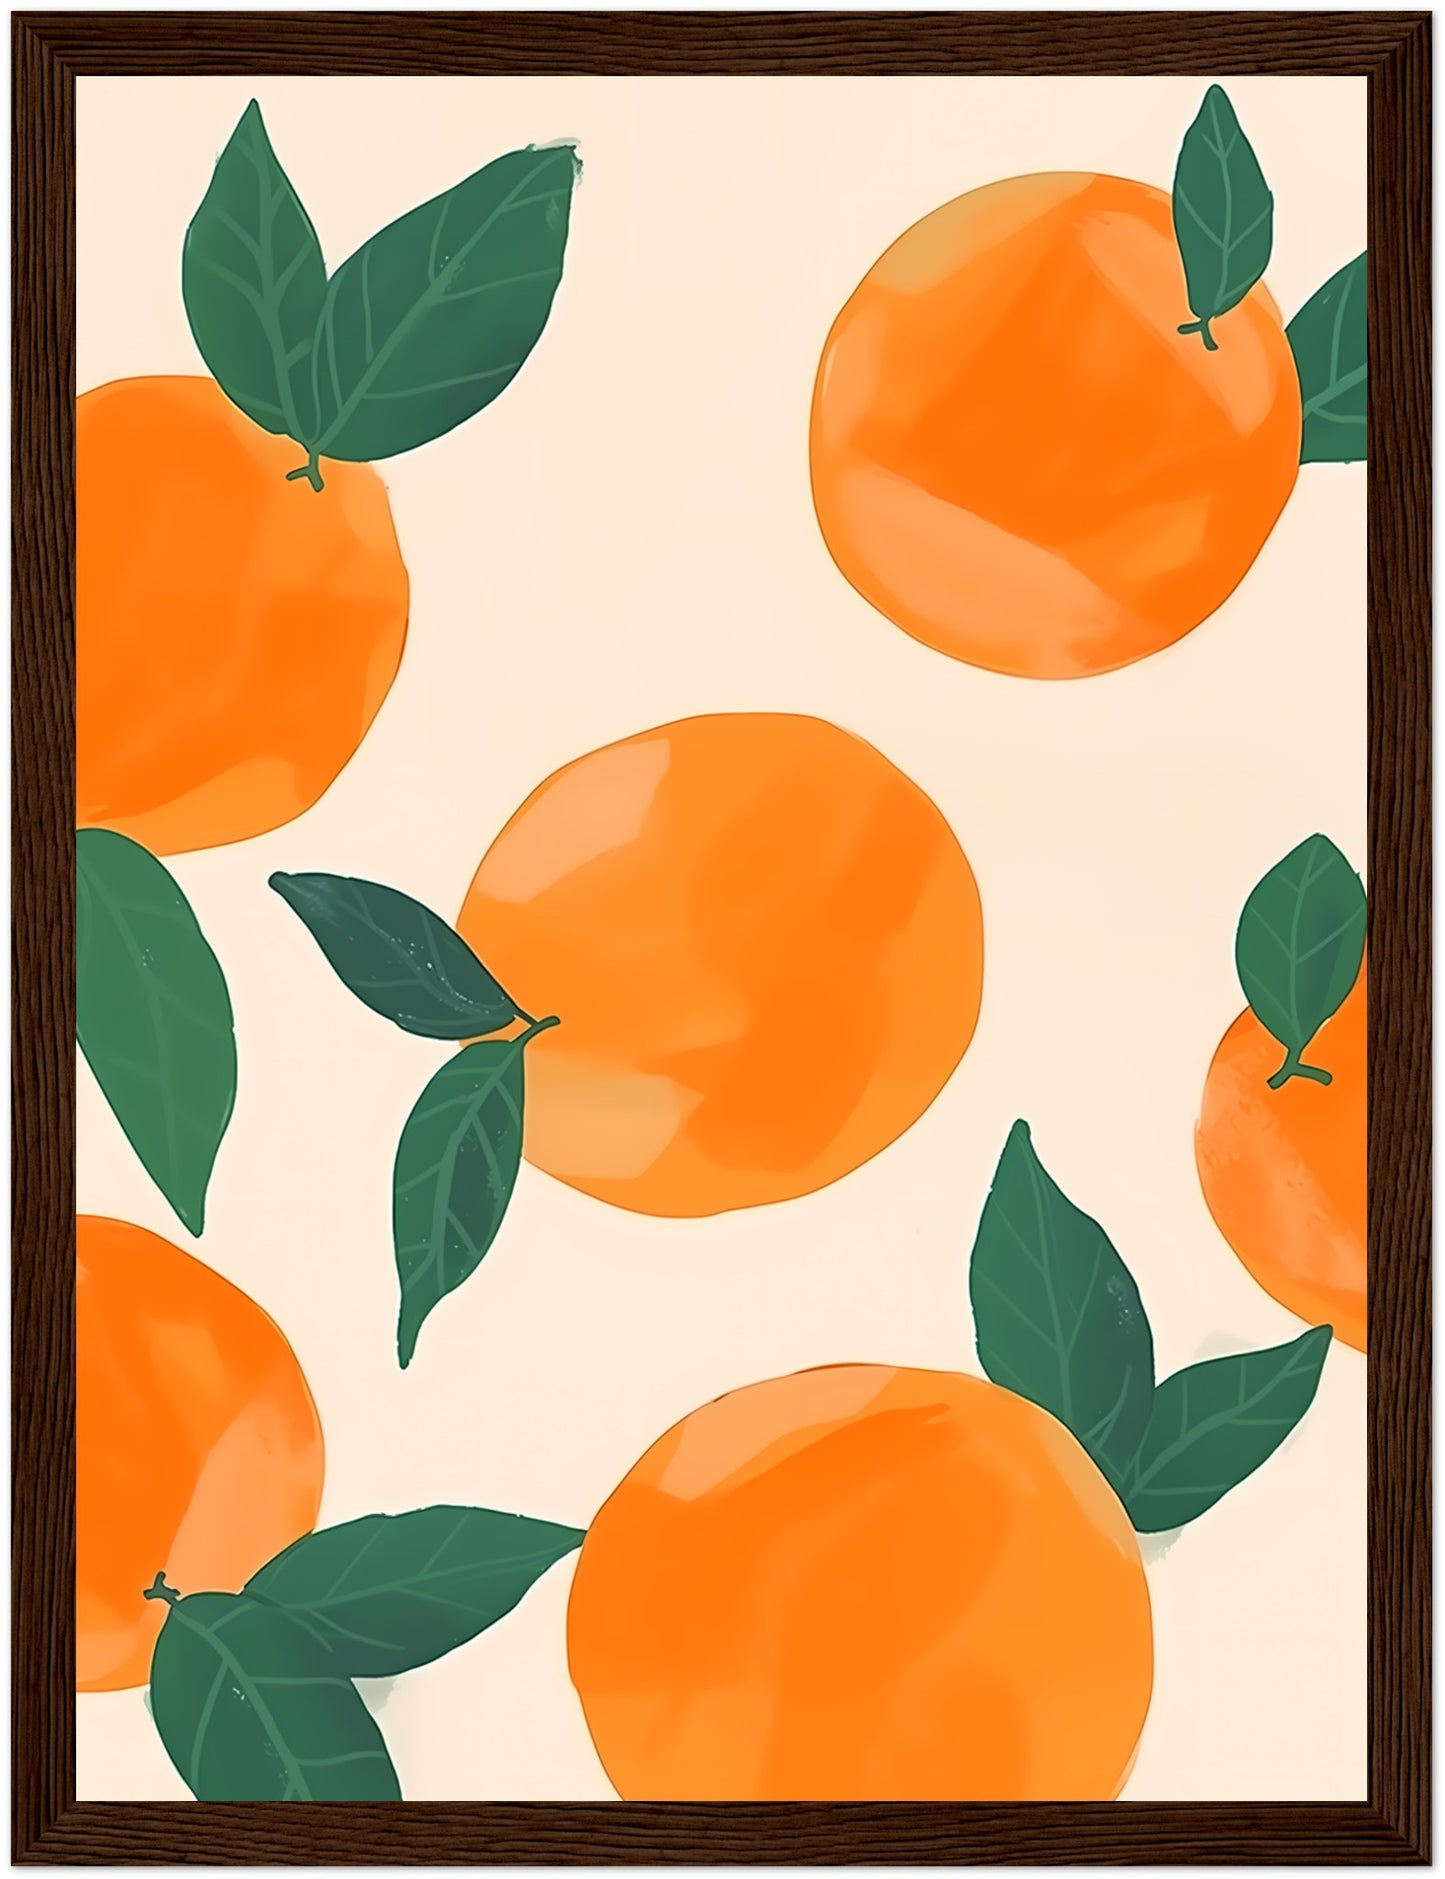 Illustration of vibrant oranges with leaves on a pale background, framed by a dark border.